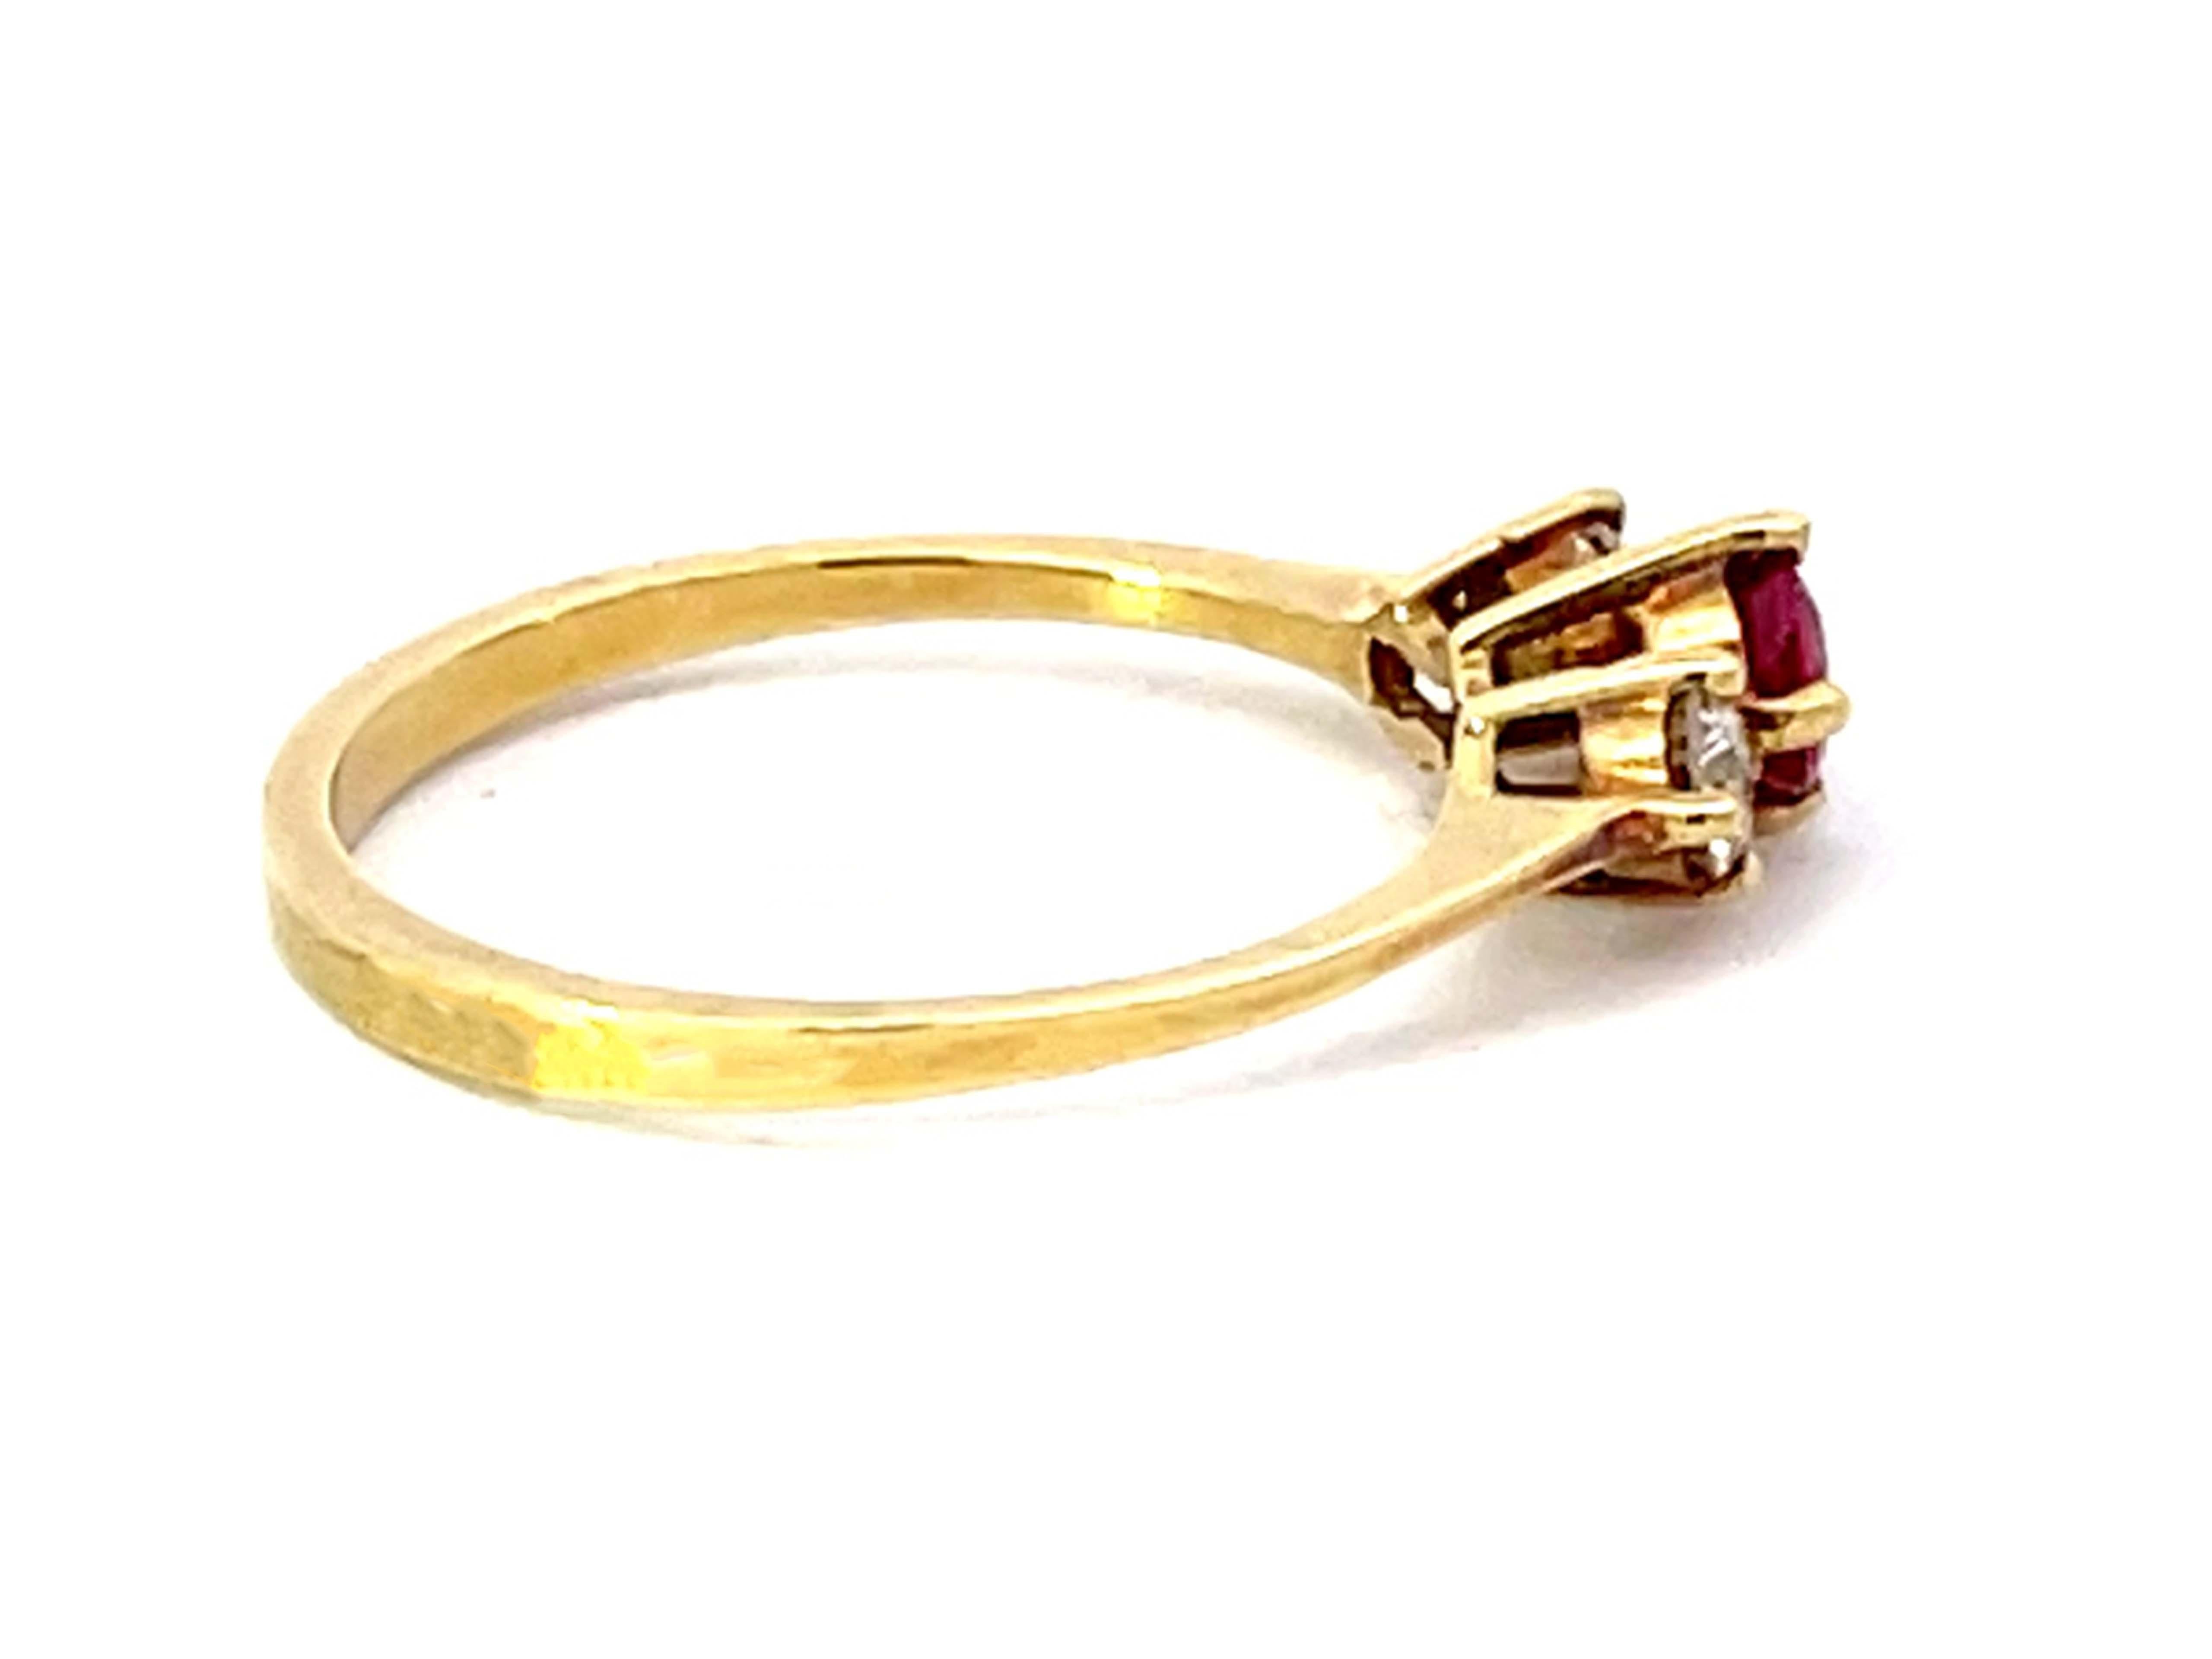 Round Red Ruby and Diamond Ring 14k Yellow Gold In Excellent Condition For Sale In Honolulu, HI